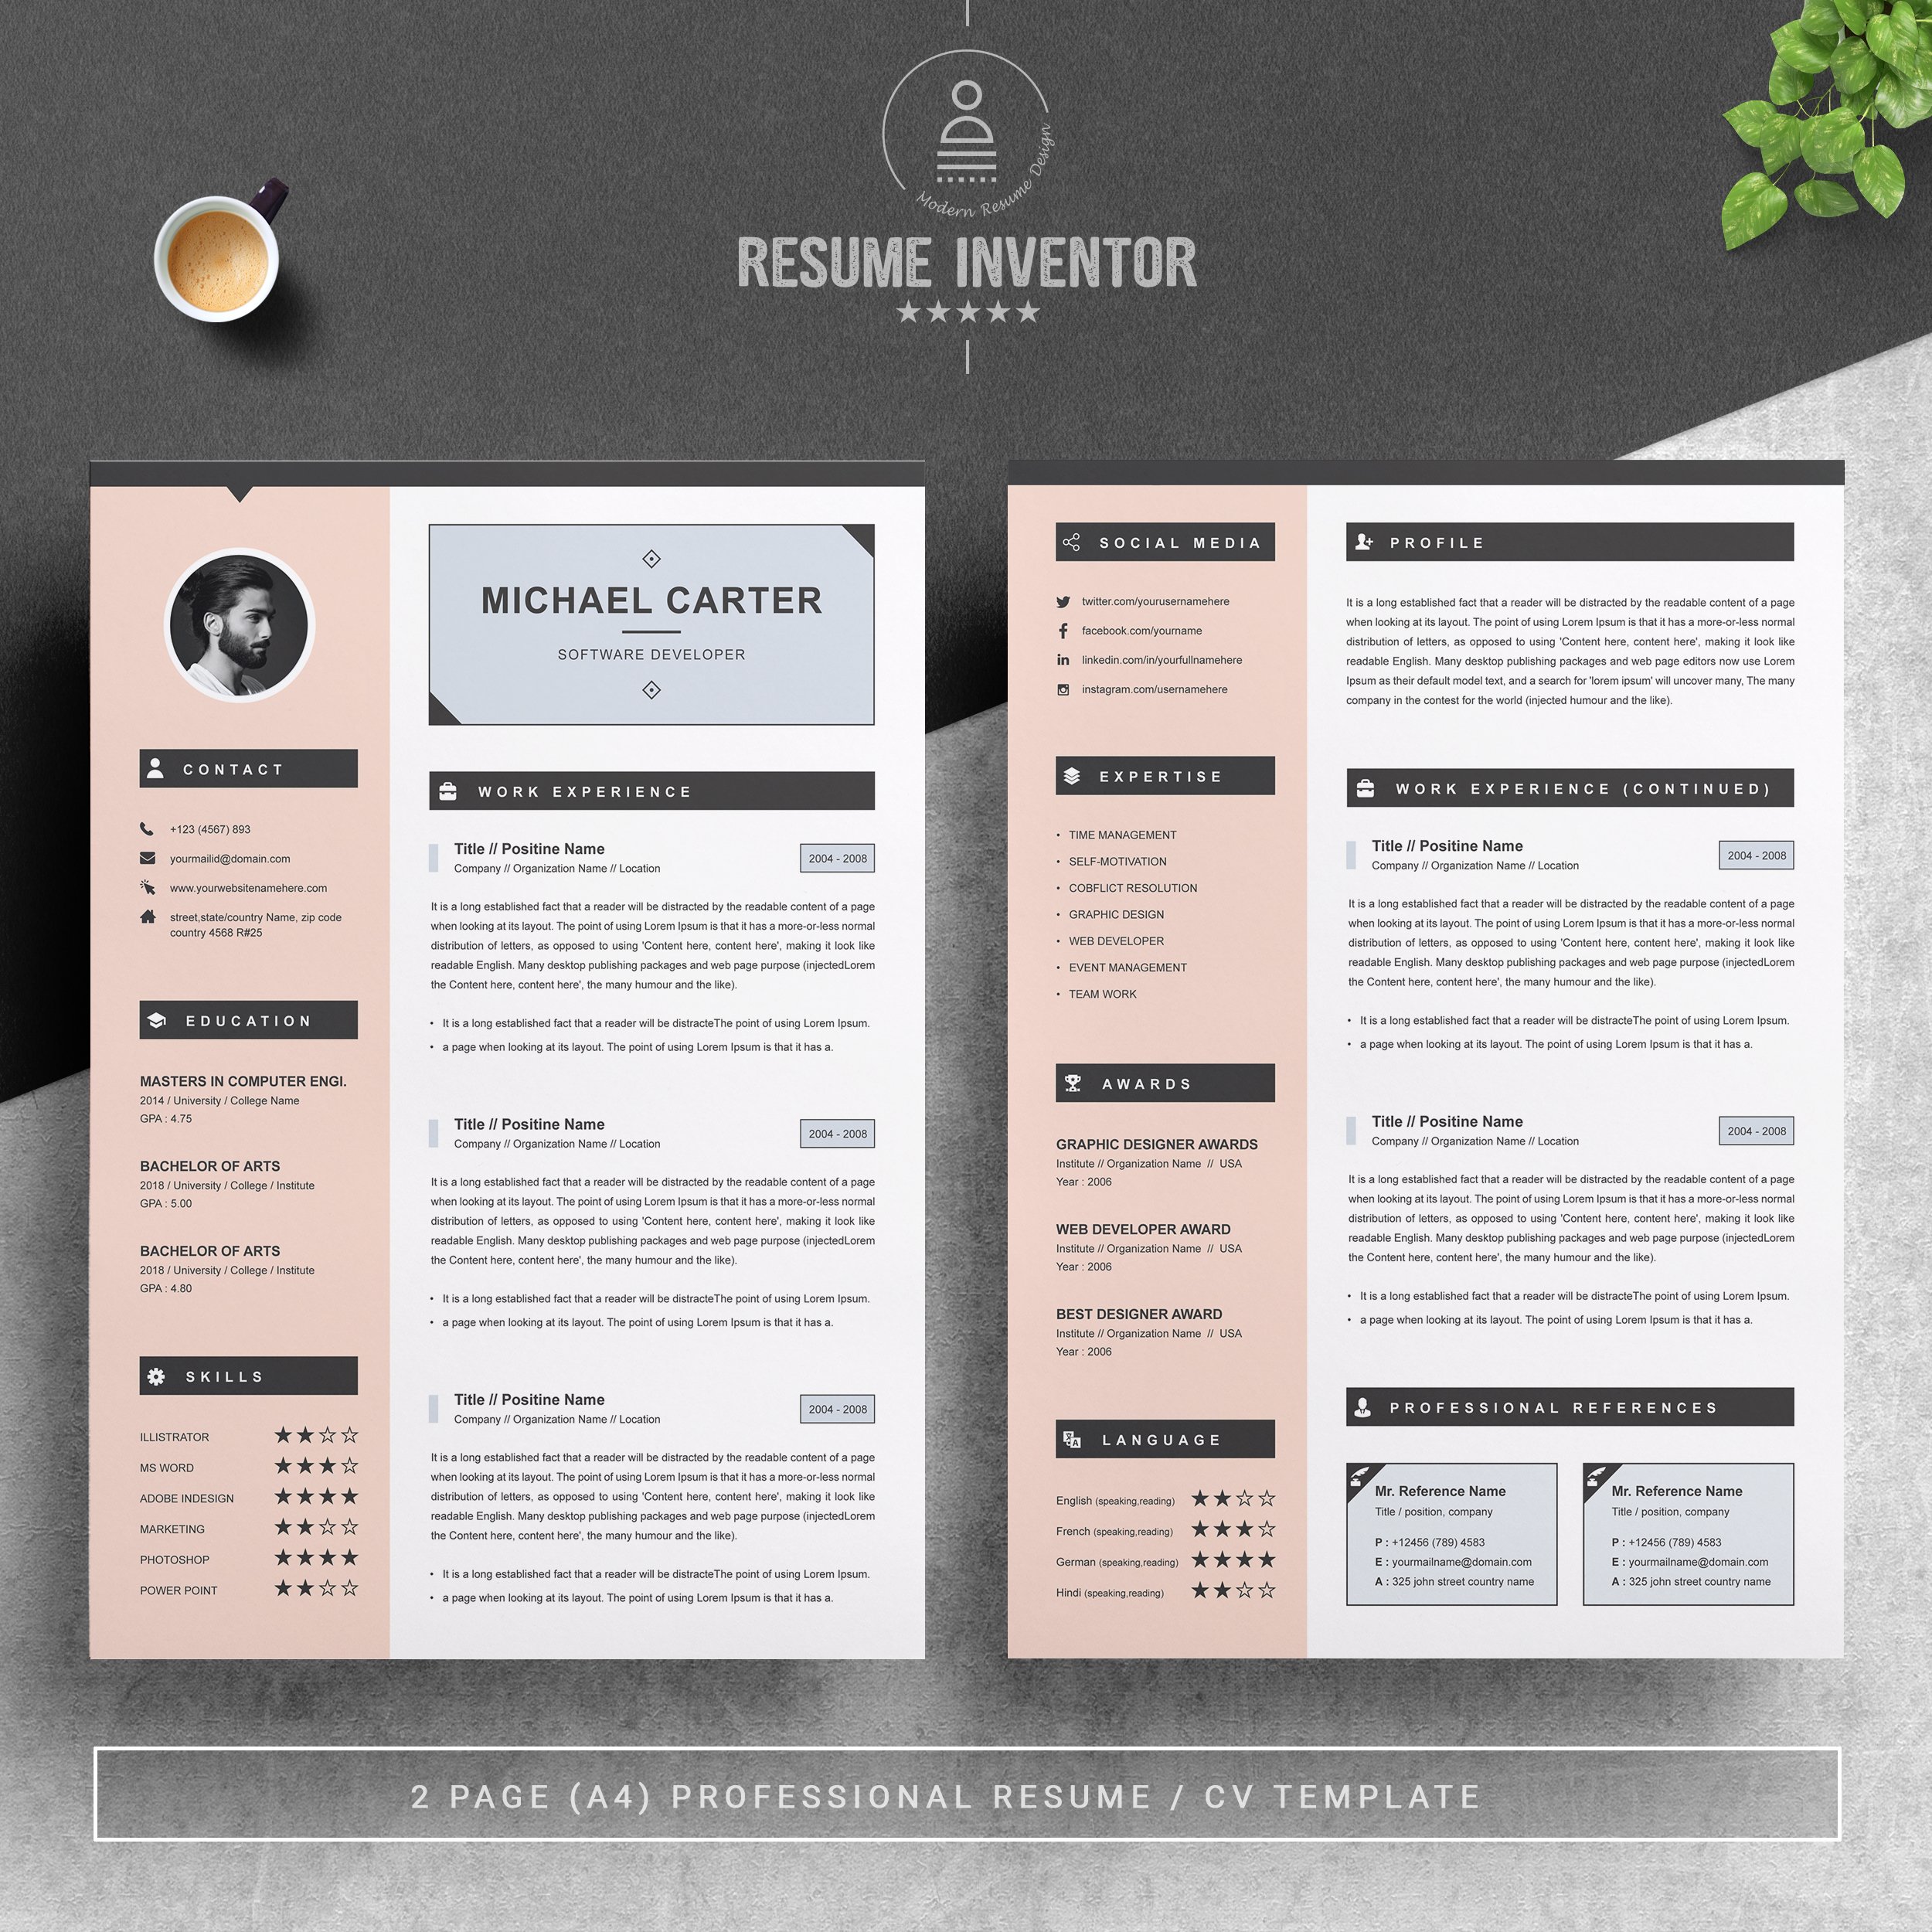 Modern Resume / CV Template | 3 Page preview image.